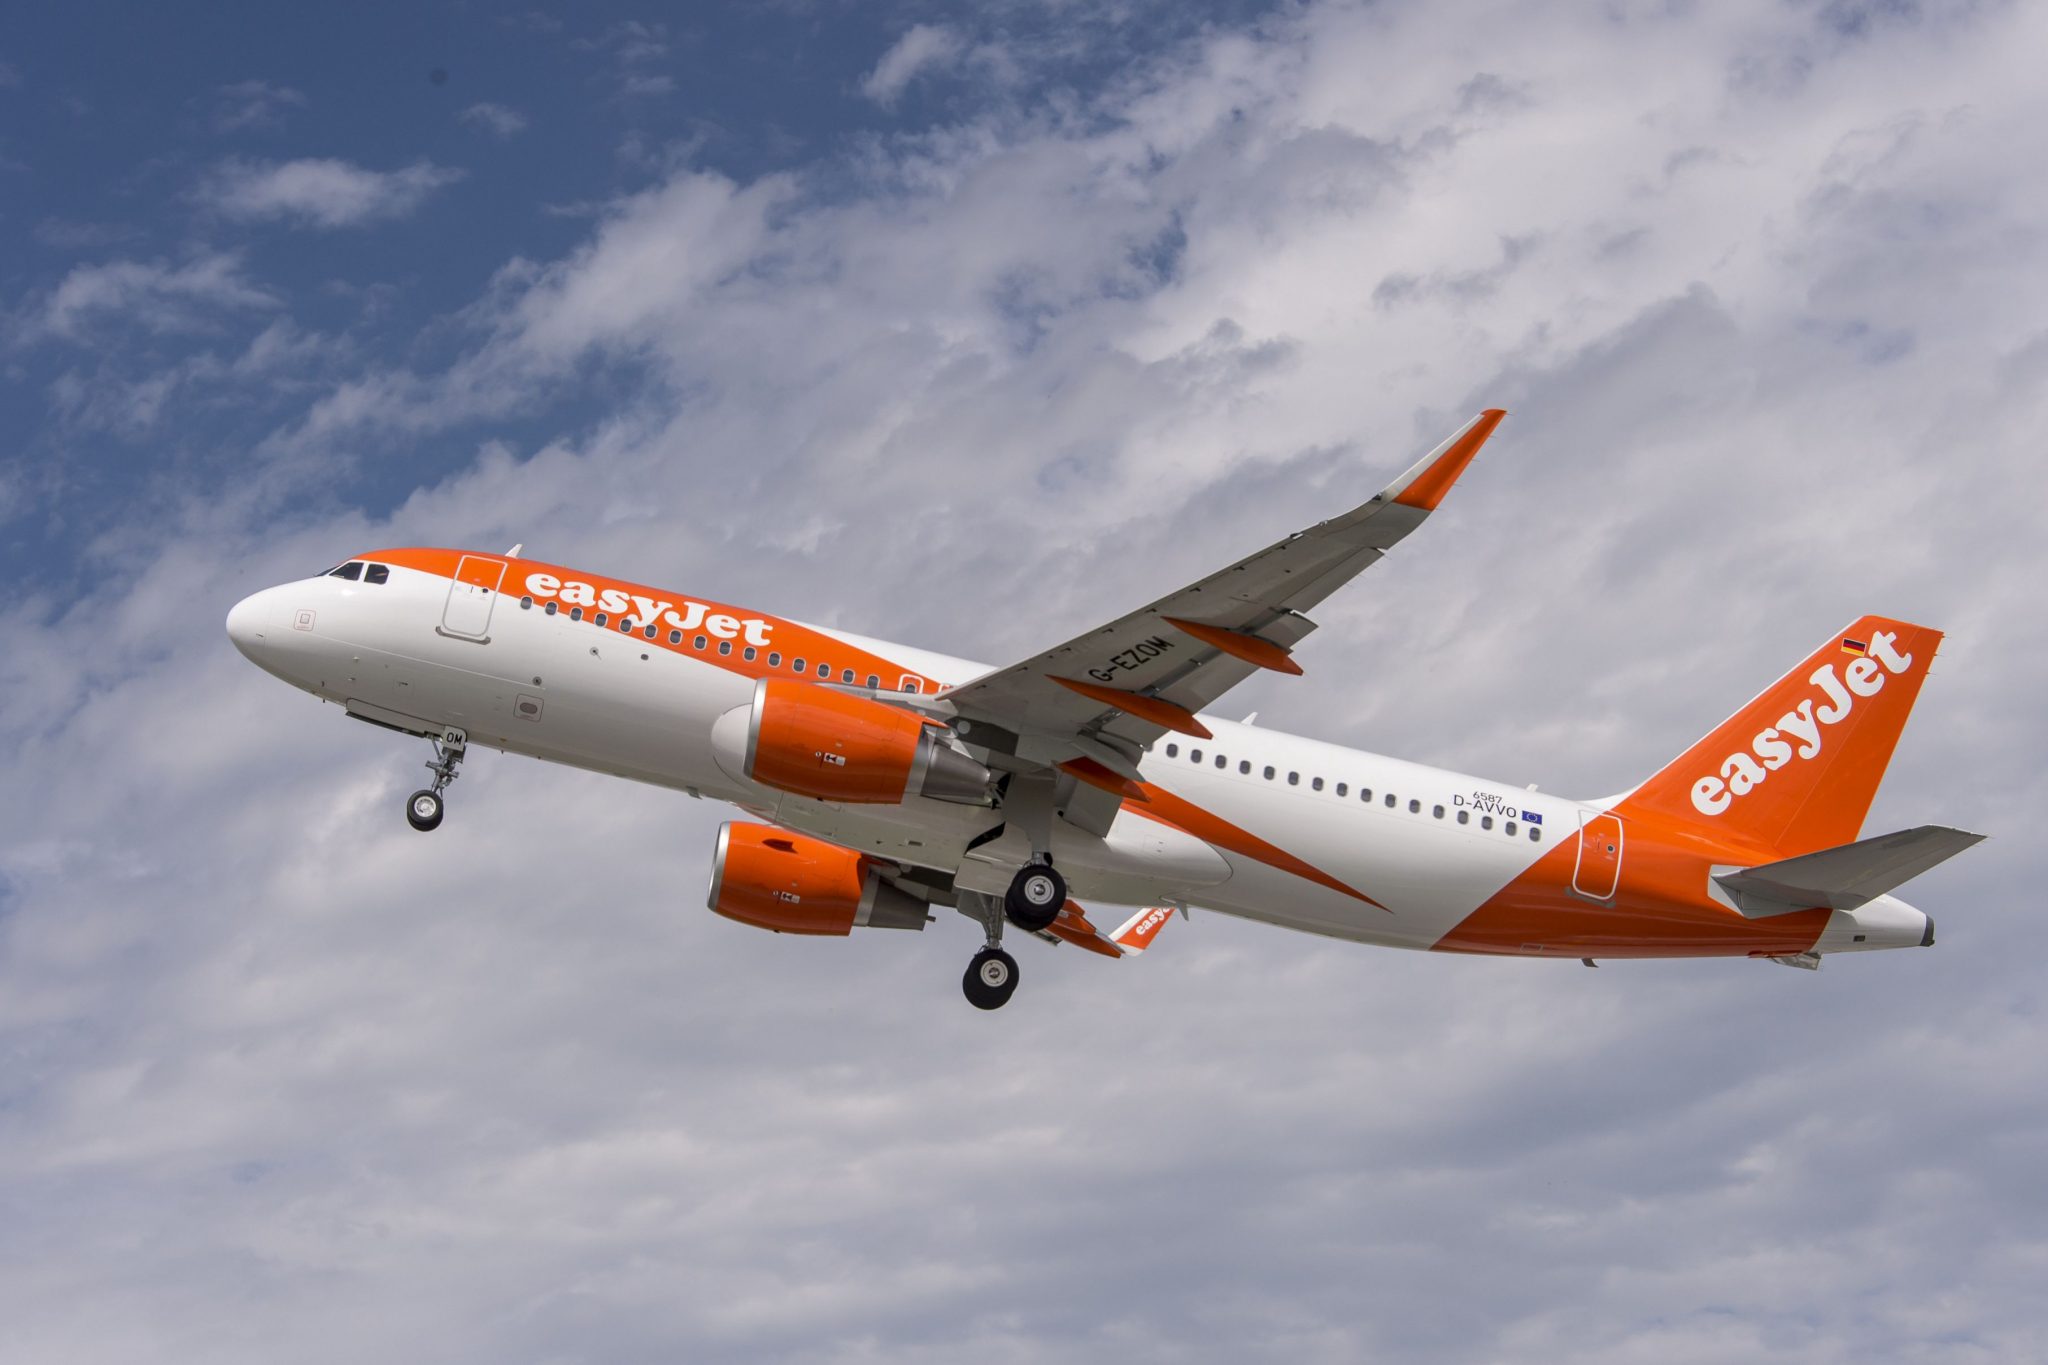 EasyJet signs Skywise Predictive Maintenance agreement with Airbus for its entire fleet